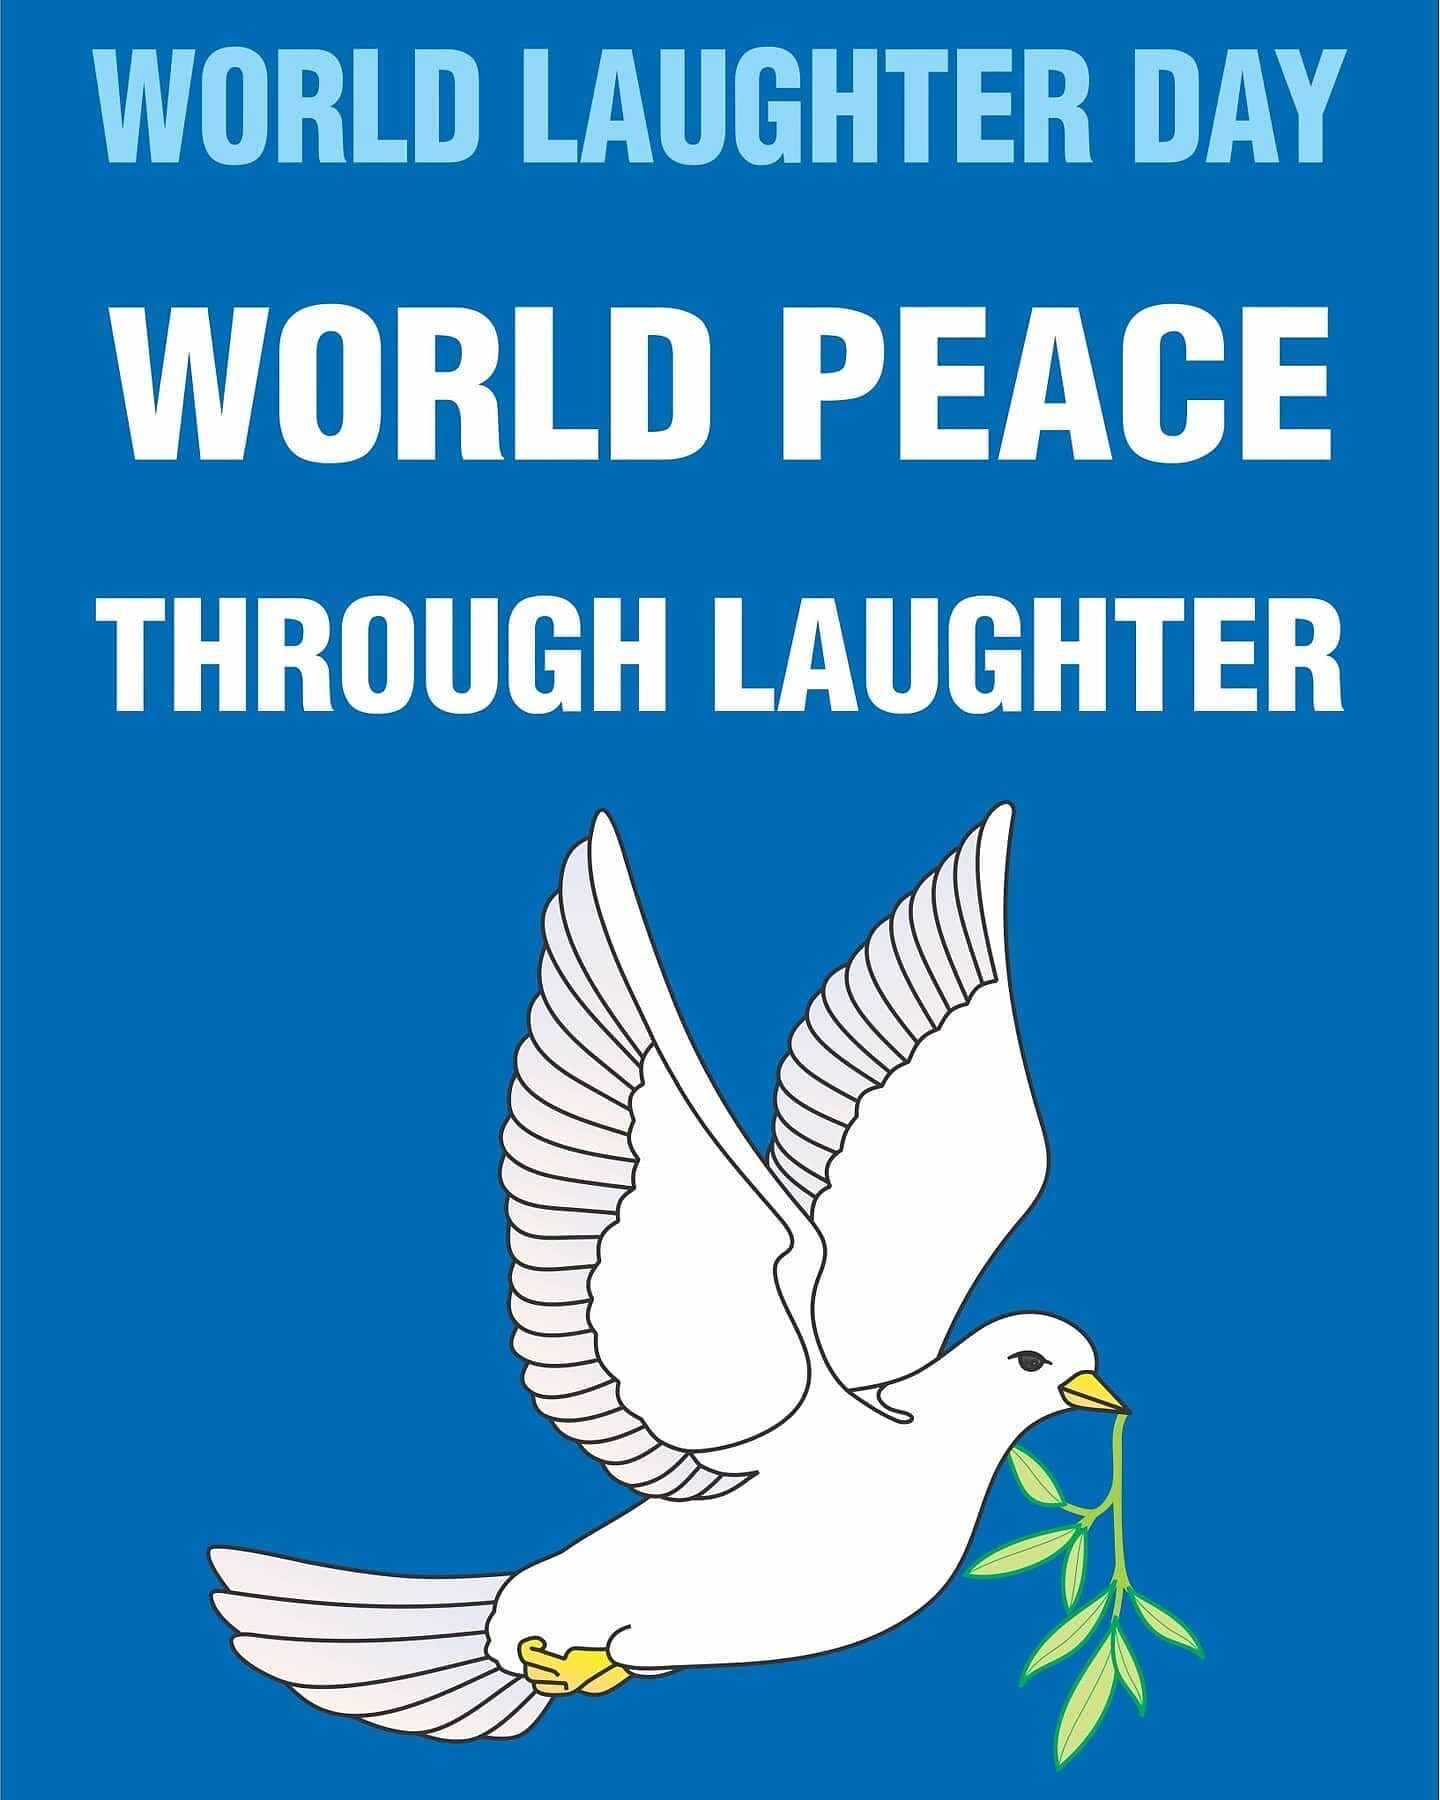 World Laughter Day is this Sunday!

World Laughter Day is Laughter Yoga's official holiday. It is always the first Sunday in May. It is a day to celebrate the power of laughter and let the vision of Laughter Yoga, World Peace Through Laughter, really